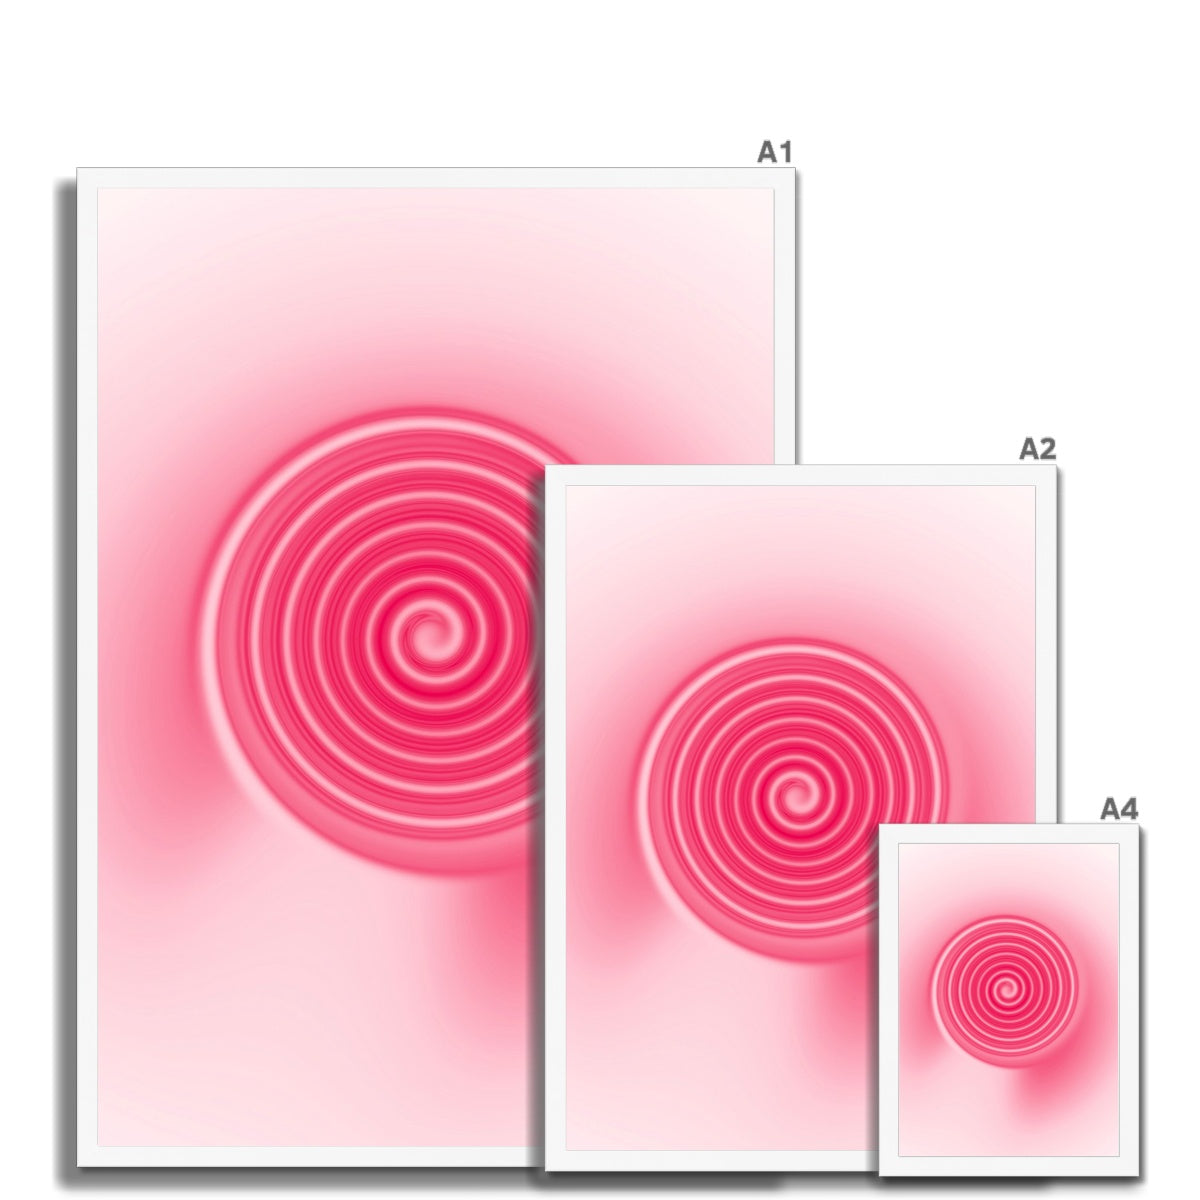 © les muses / Abstract gradient aura wall art prints featuring warped pastel gradients resembling swirled candy. Use our colorful aura gradient posters to create a dreamy aesthetic with your dorm or apartment decor.